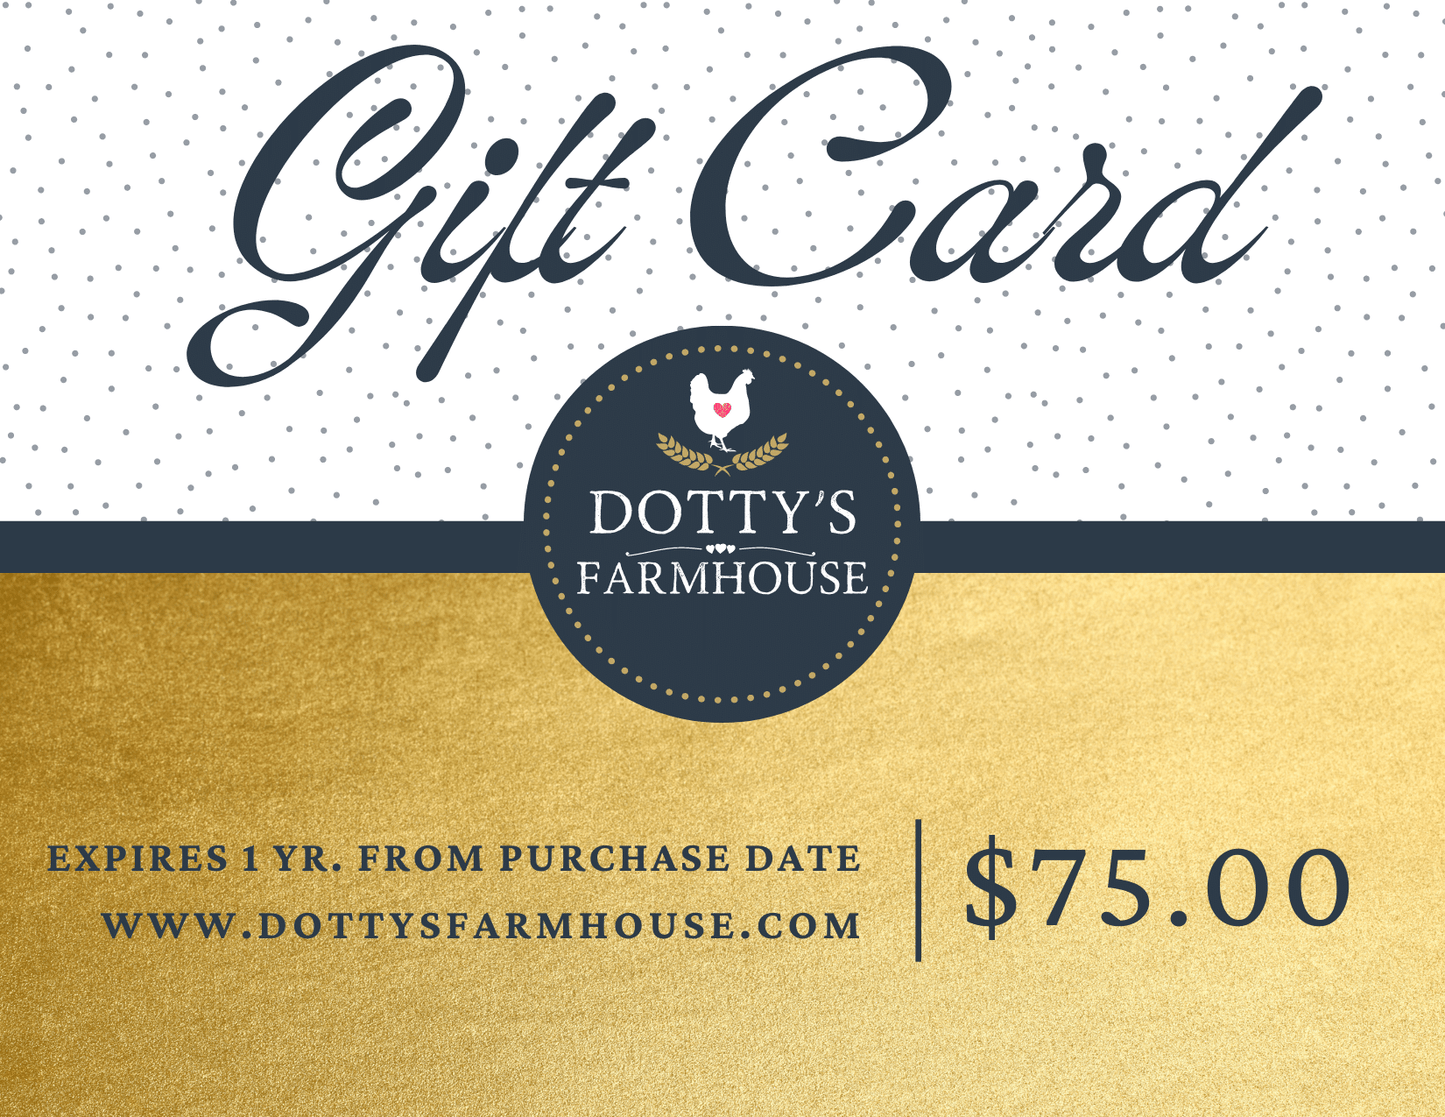 Gift Cards $75.00 / Email Gift Card Dotty's Farmhouse Gift Card